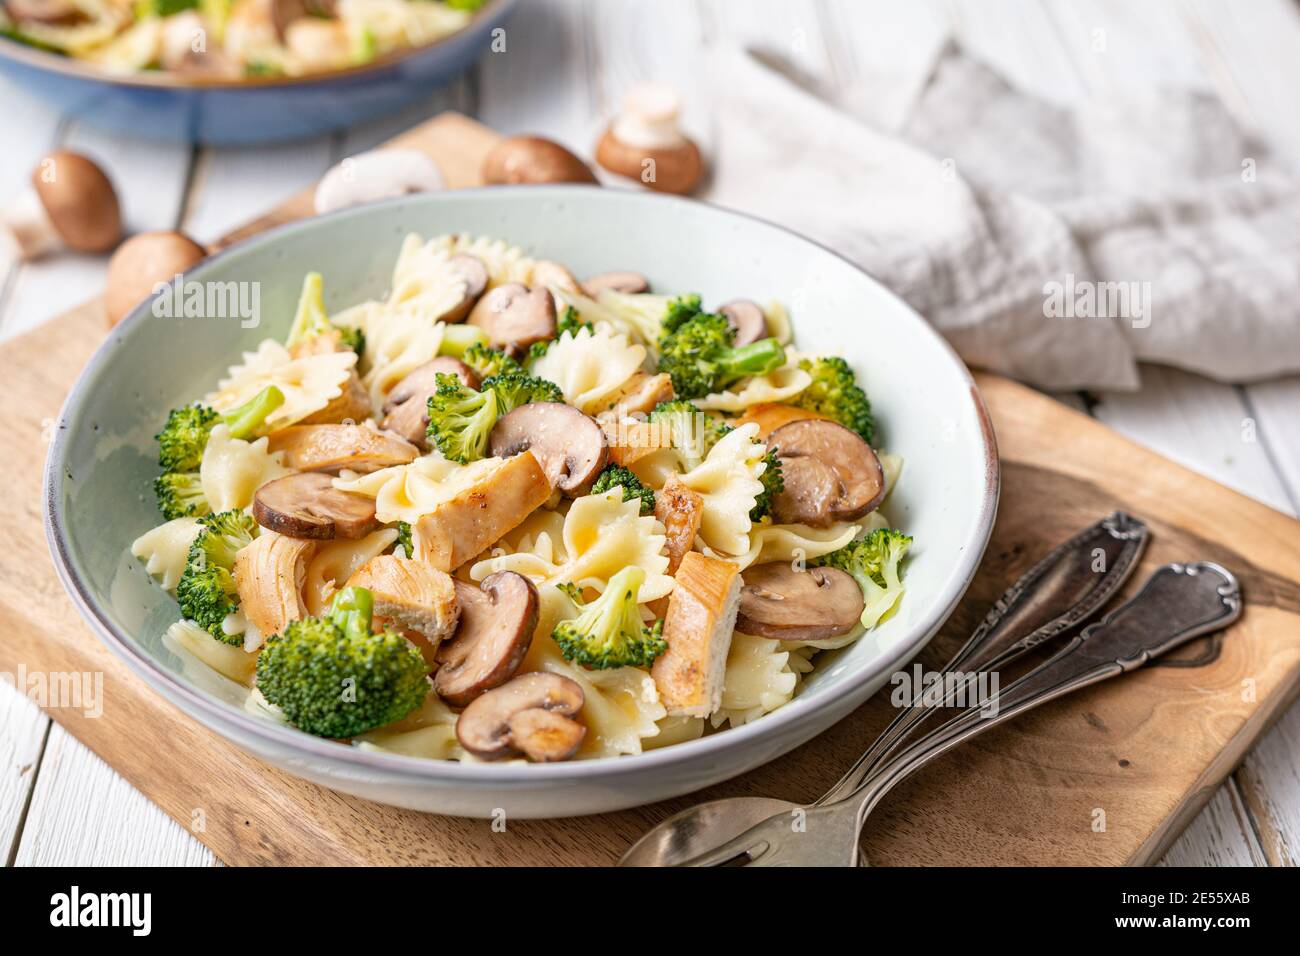 Mushroom pasta salad with steamed broccoli and baked chicken meat slices for lunch Stock Photo